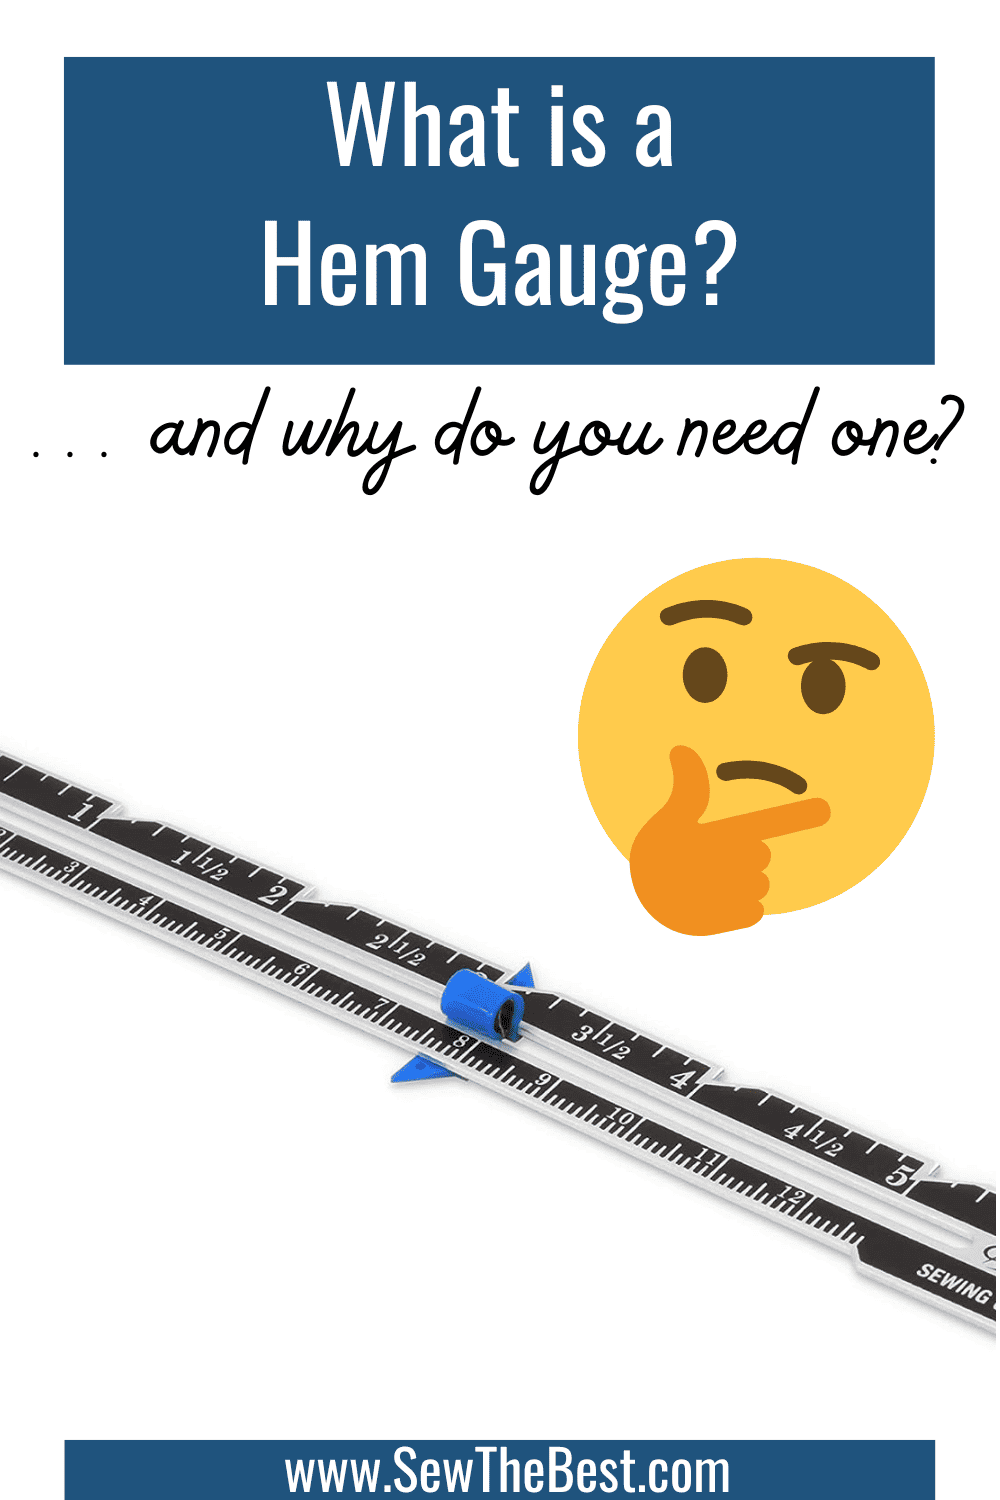 What is a Hem Gauge? ... and why do you need one? Picture of thinking face emoji and a hem gauge follows.